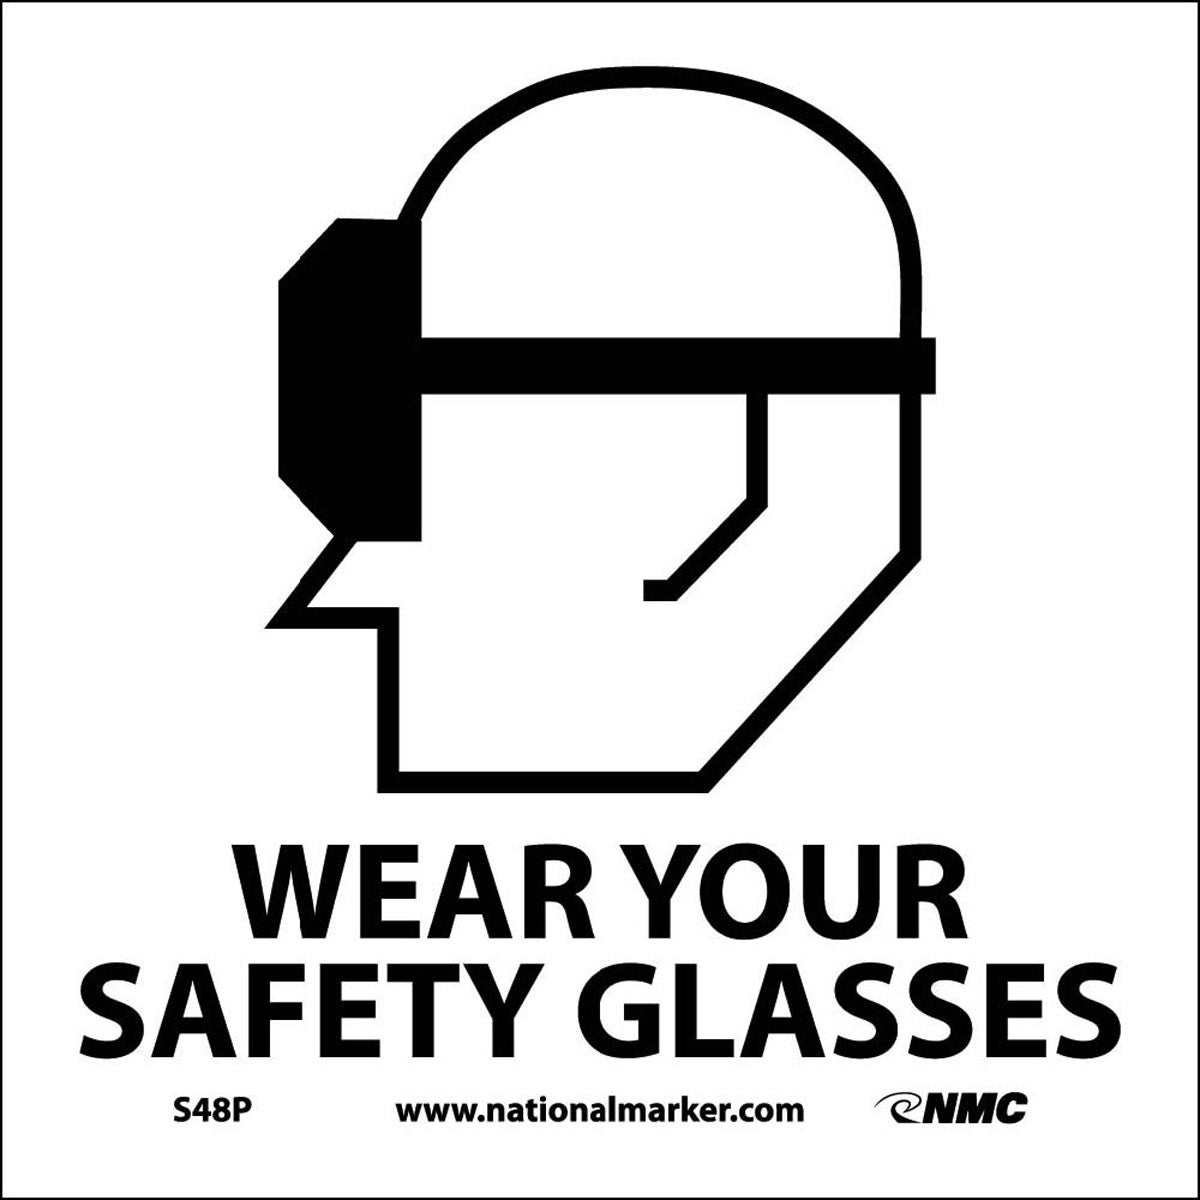 NM 7" X 7" White .0045" Pressure Sensitive Vinyl Safety Sign "WEAR YOUR SAFETY GLASSES"